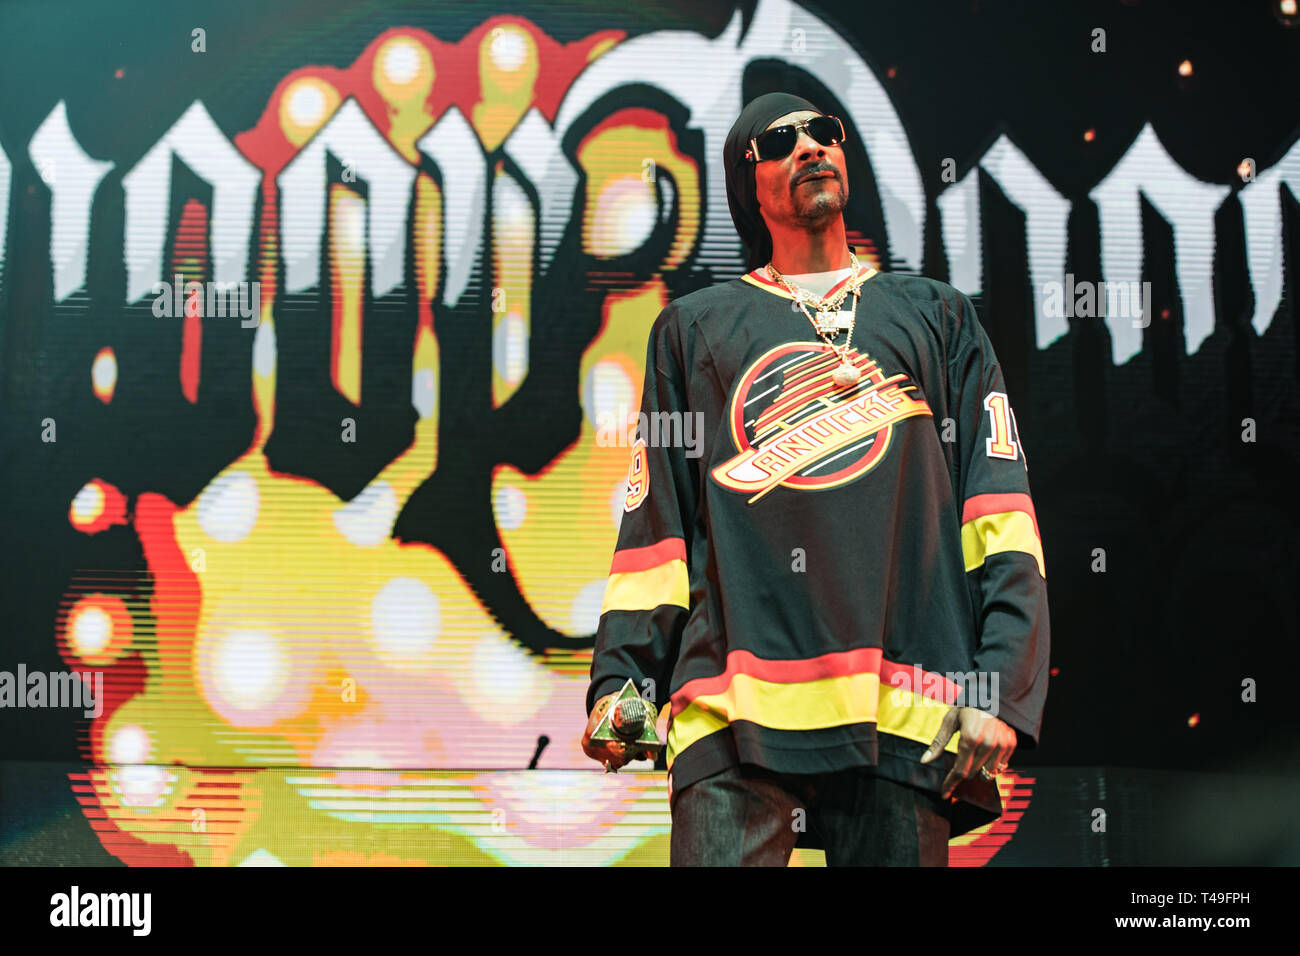 American rapper Snoop Dogg performing at Rogers Arena in Vancouver, BC on February 22nd, 2019 Stock Photo